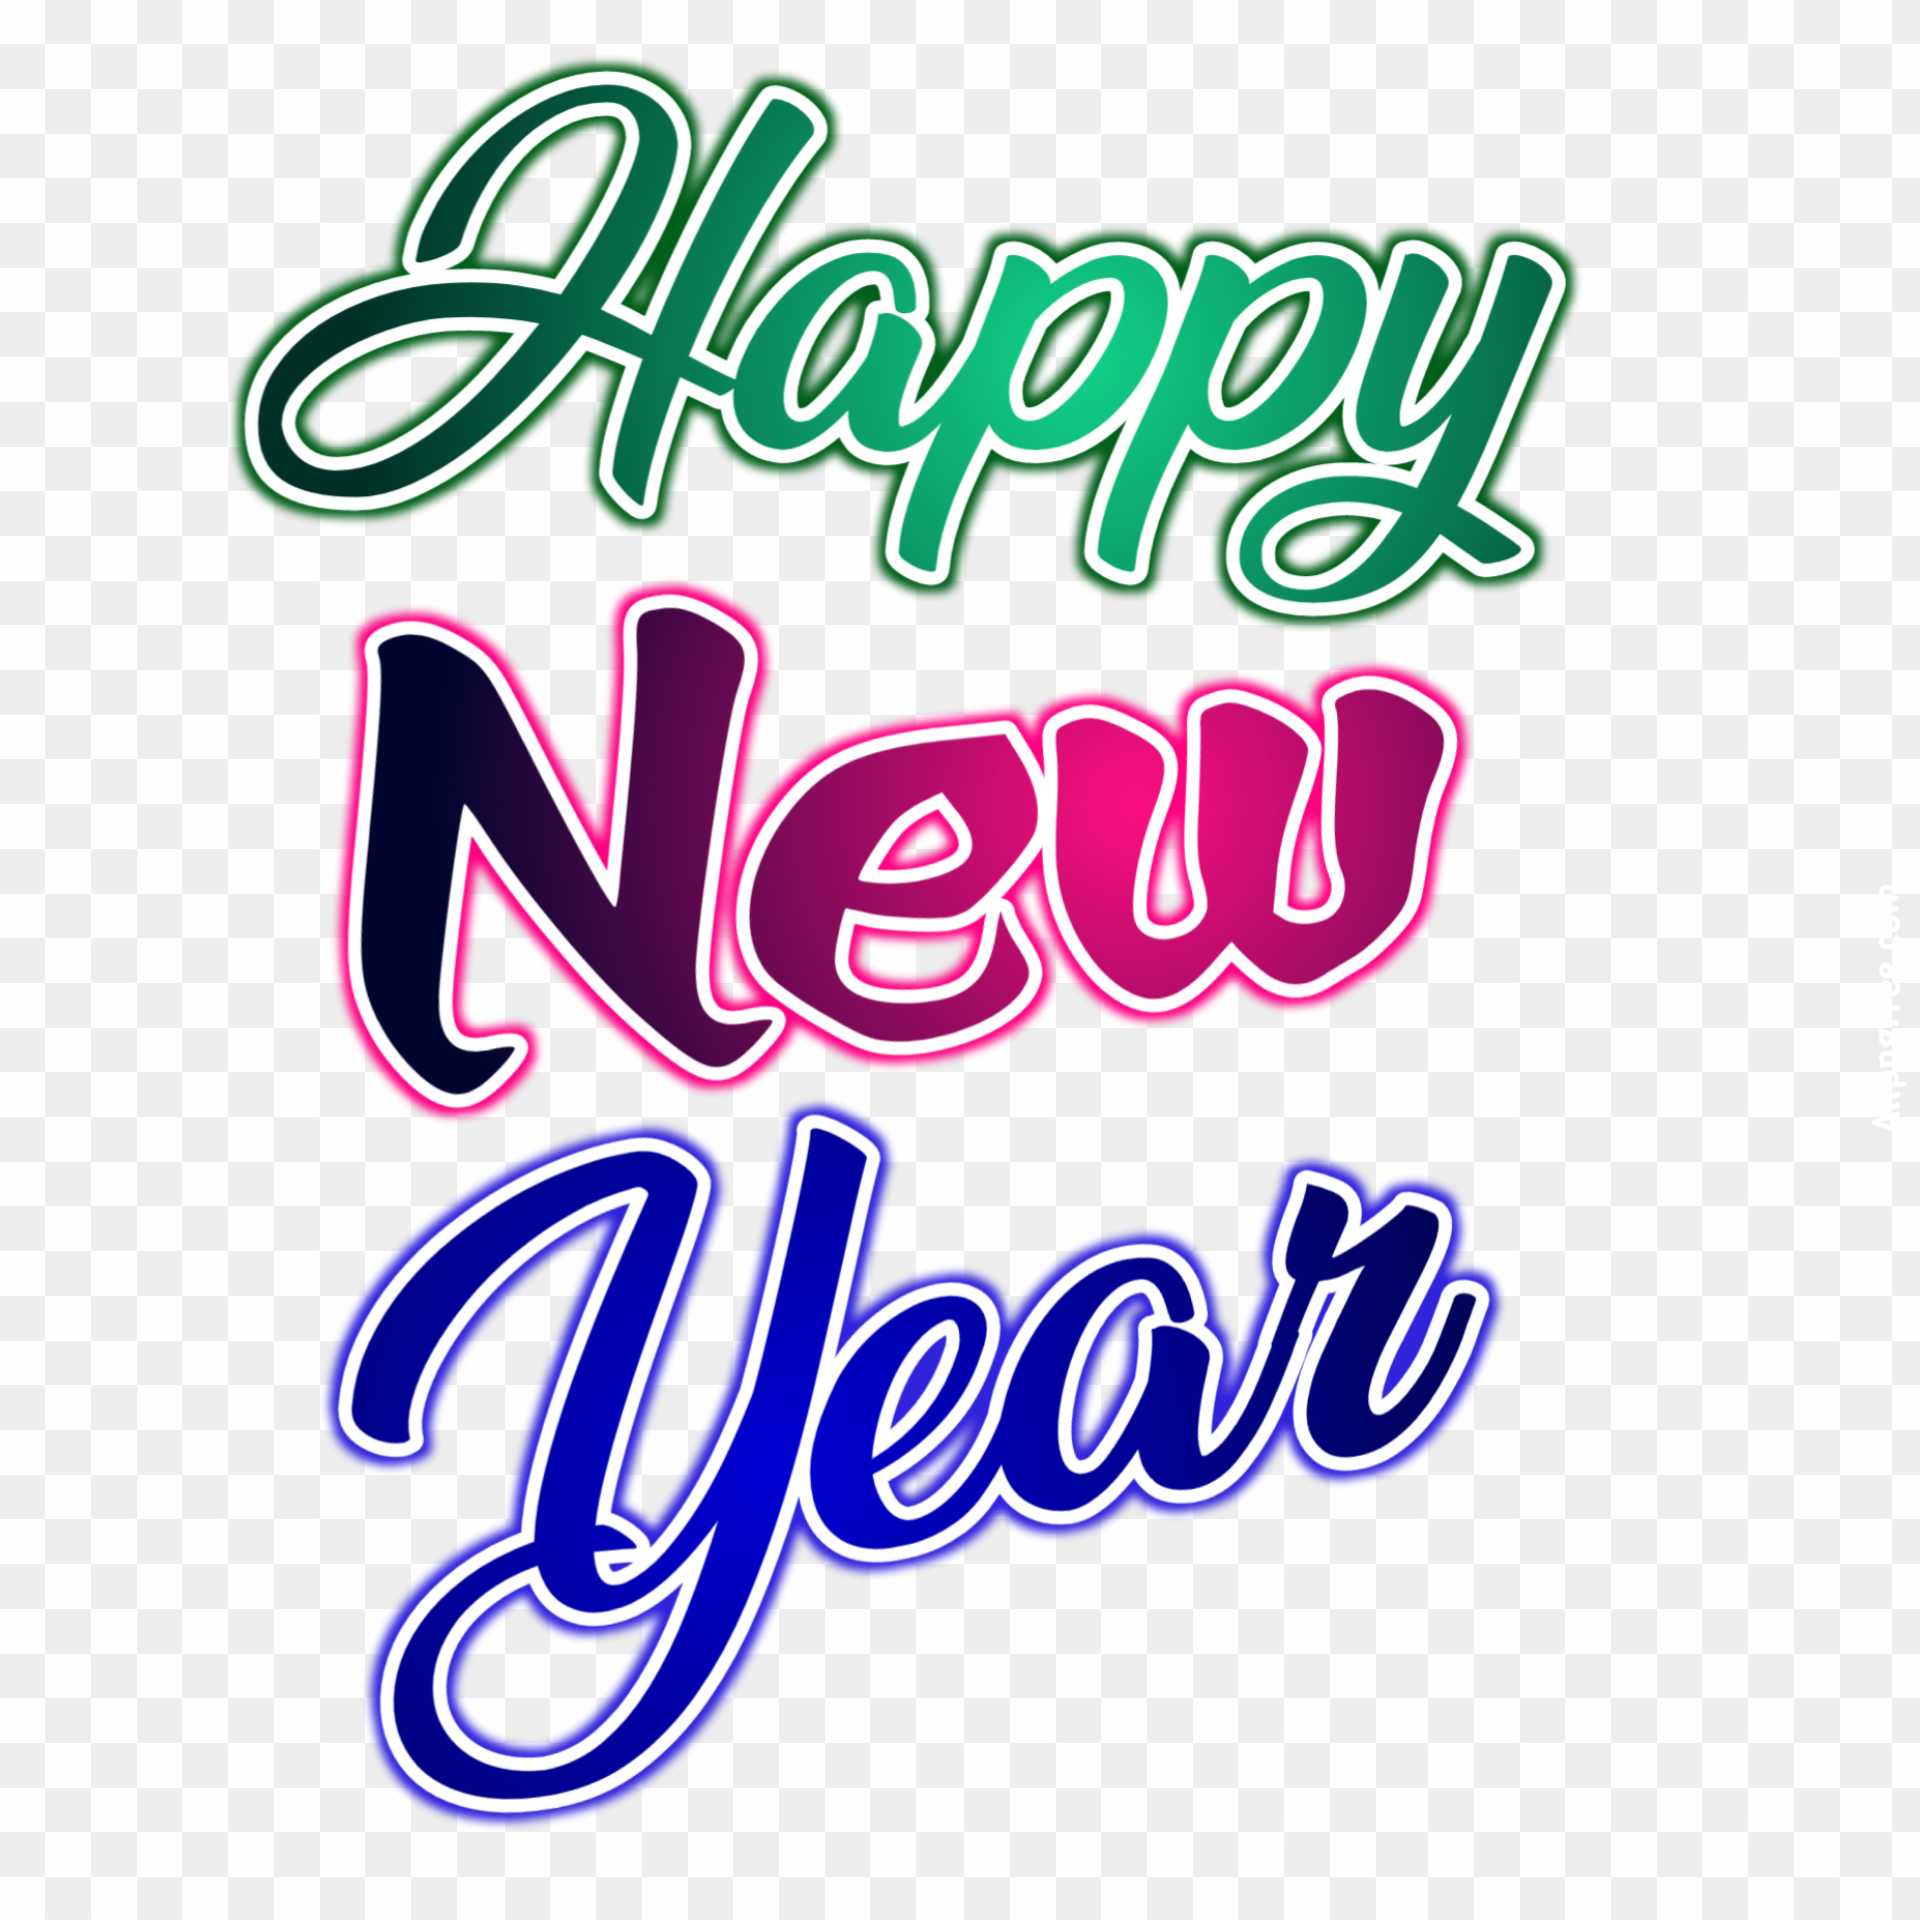 New Year PNG Transparent Images Free